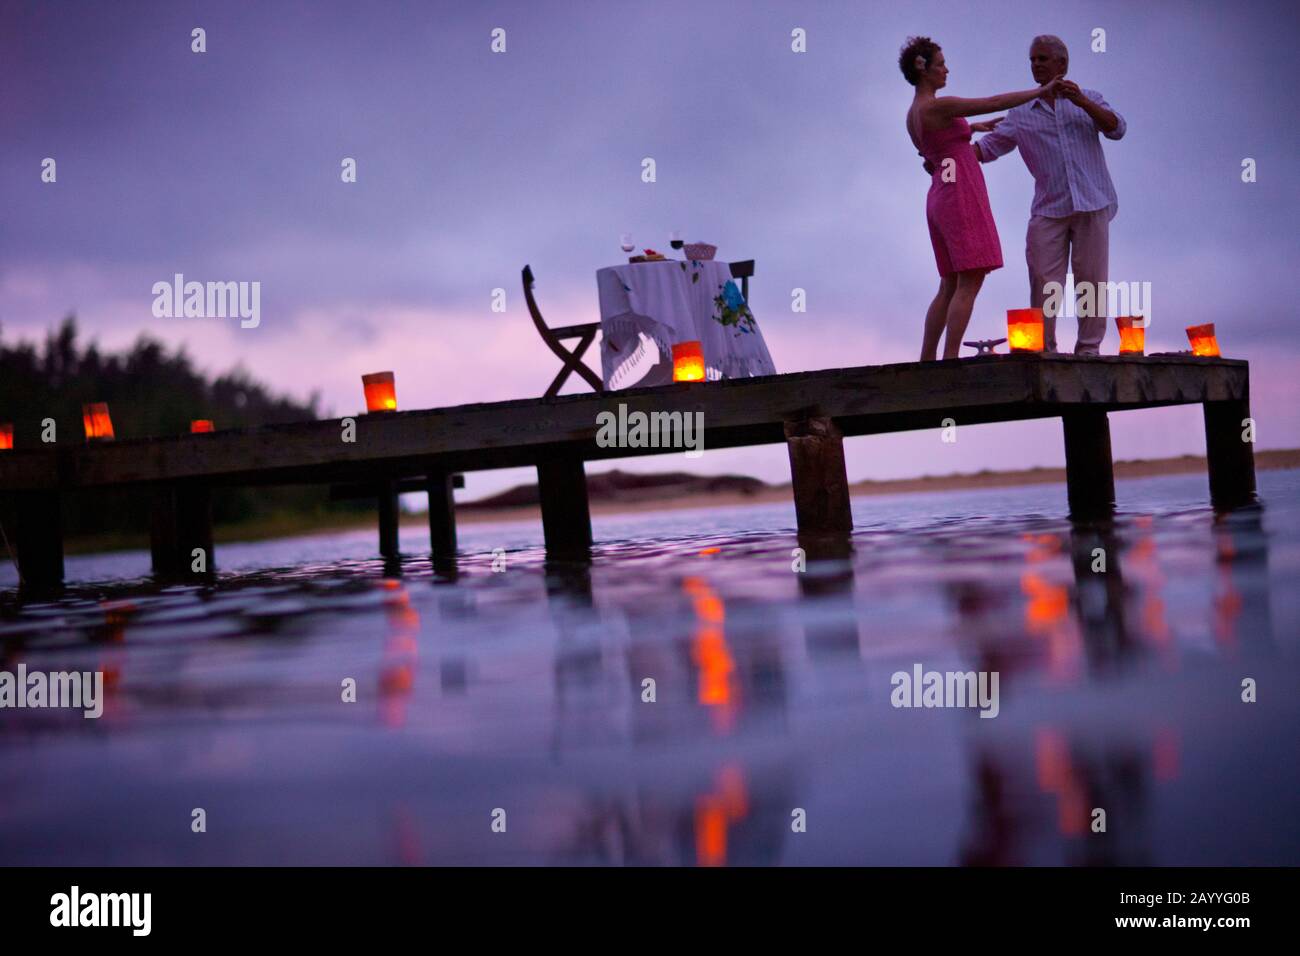 Couple shares a romantic sunset dancing on a pier. Stock Photo